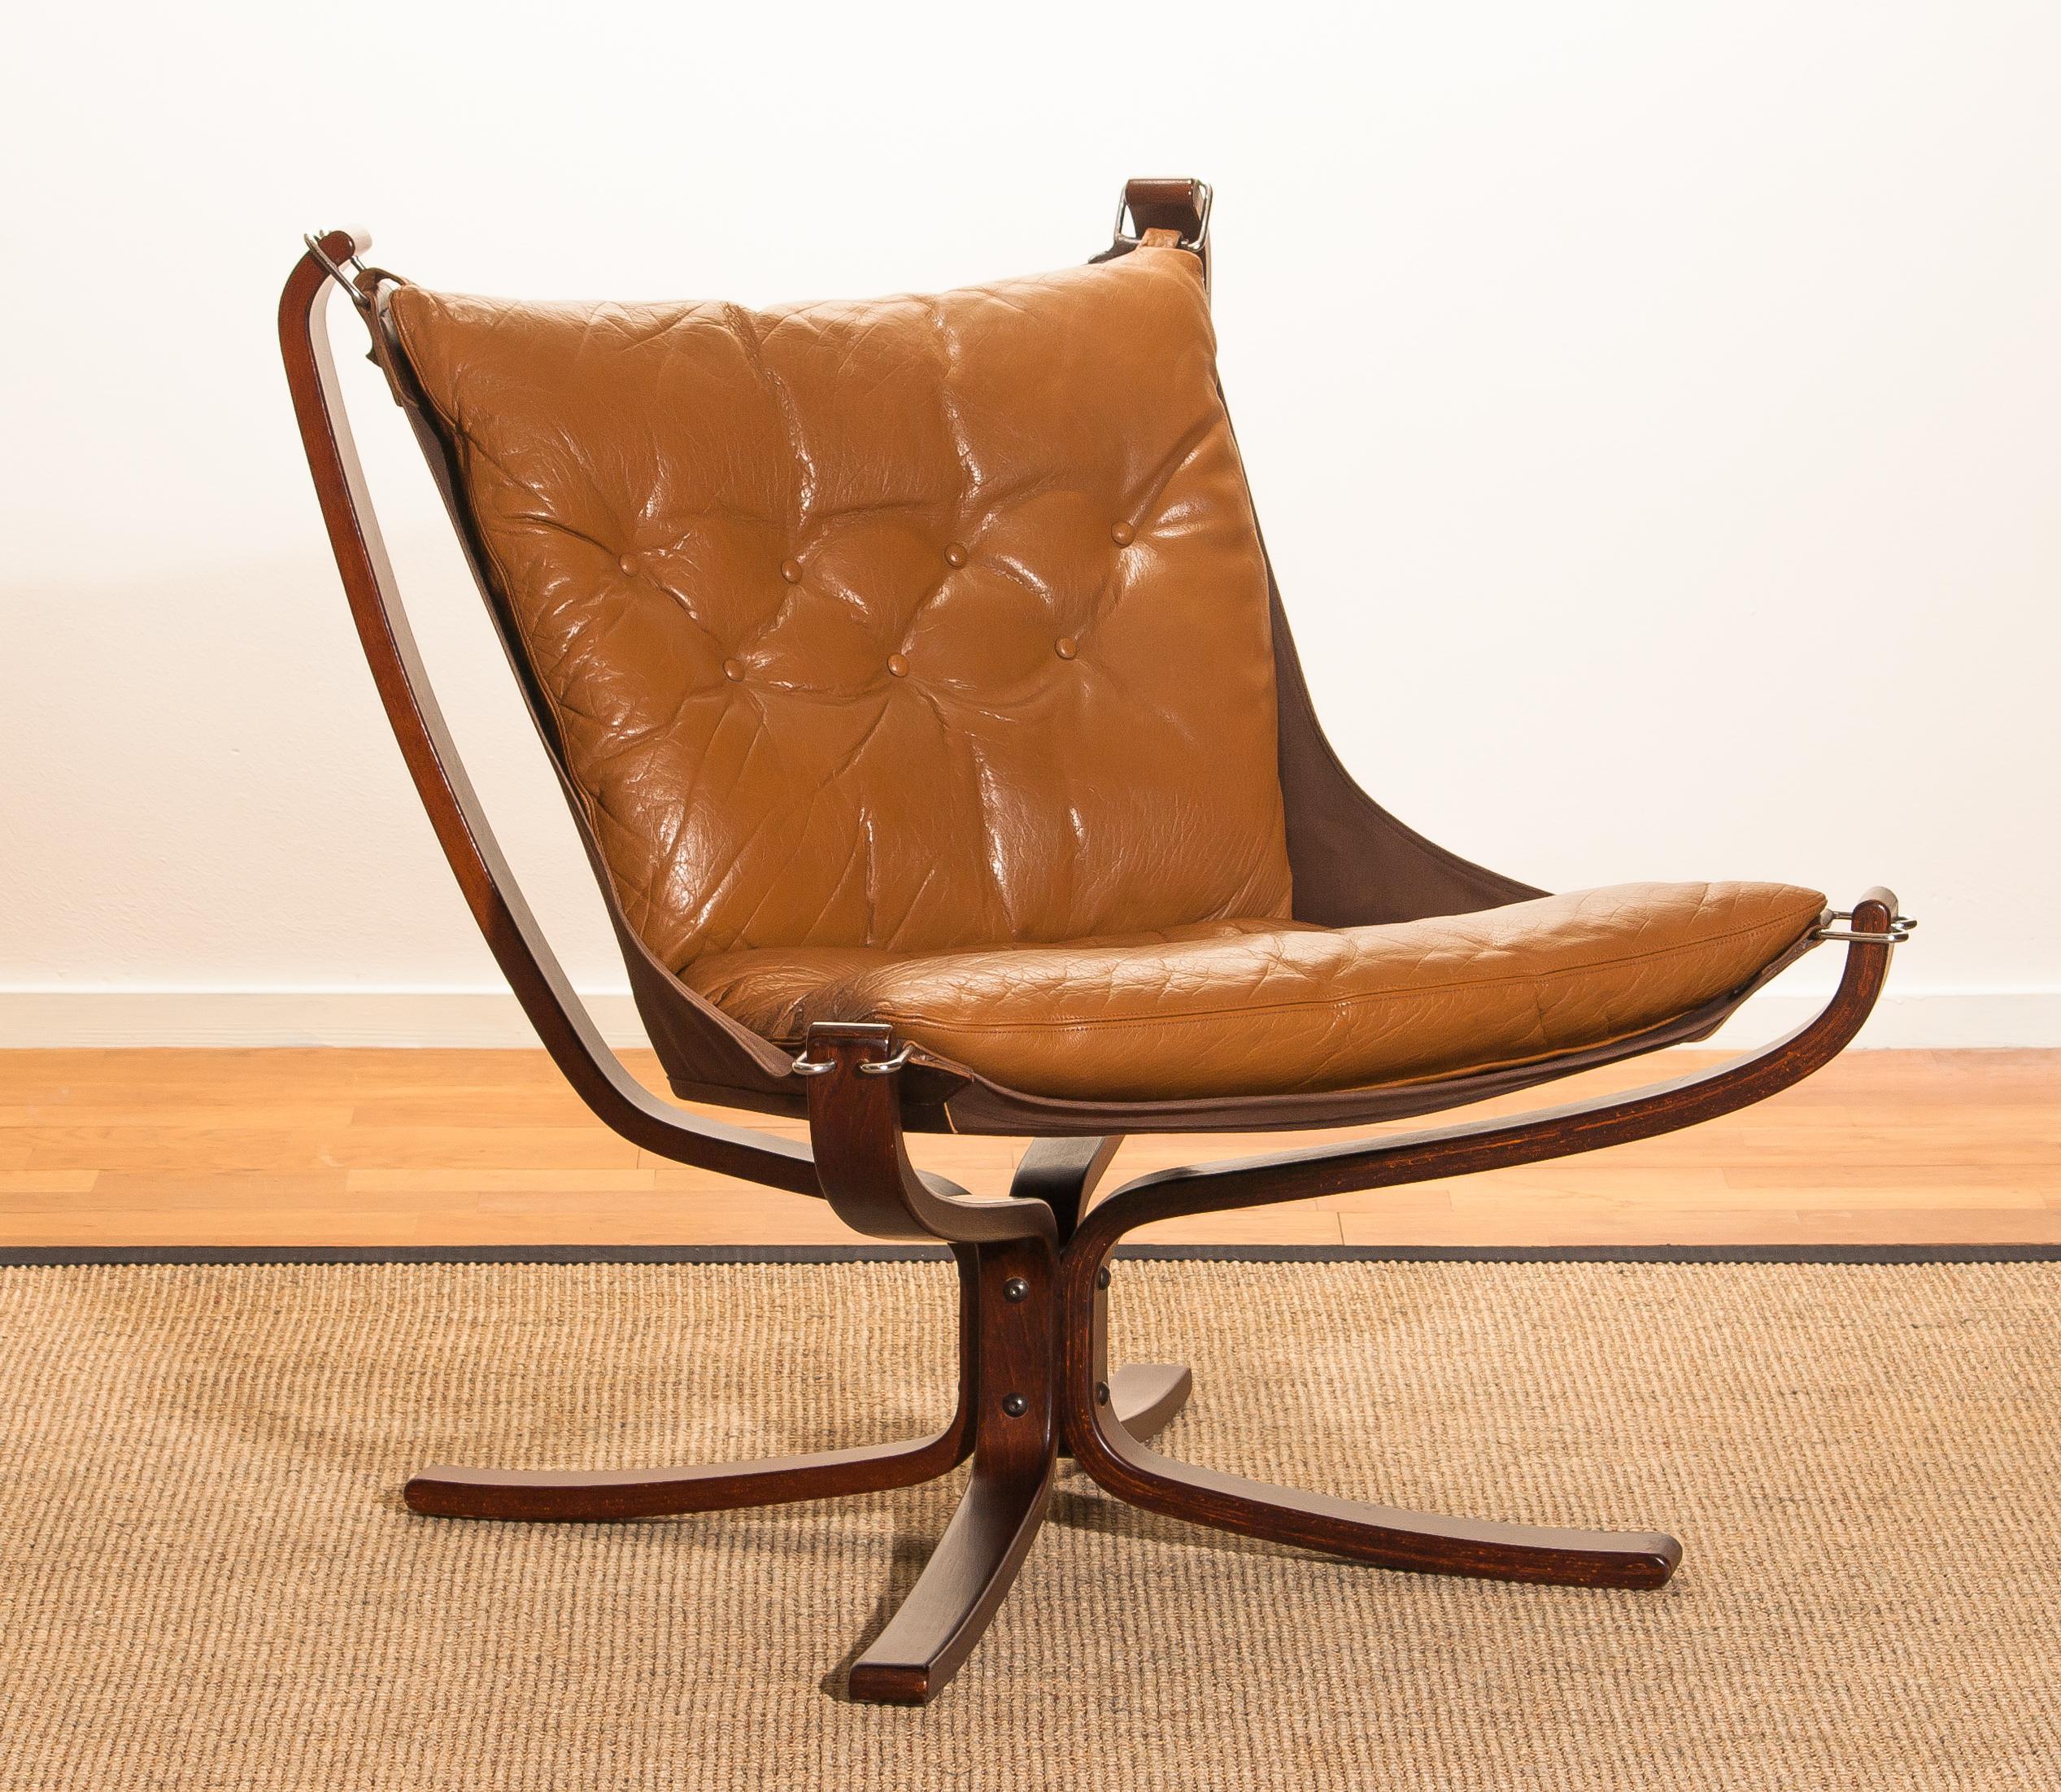 Wonderful armchair designed by Sigurd Ressell Norway.
The chair is in a very good original condition.
Both, the camel leather seating as the wooden frame are in perfect condition.
Period 1970s.
Dimensions: H 100 cm, W 80 cm, D 80 cm, SH 40